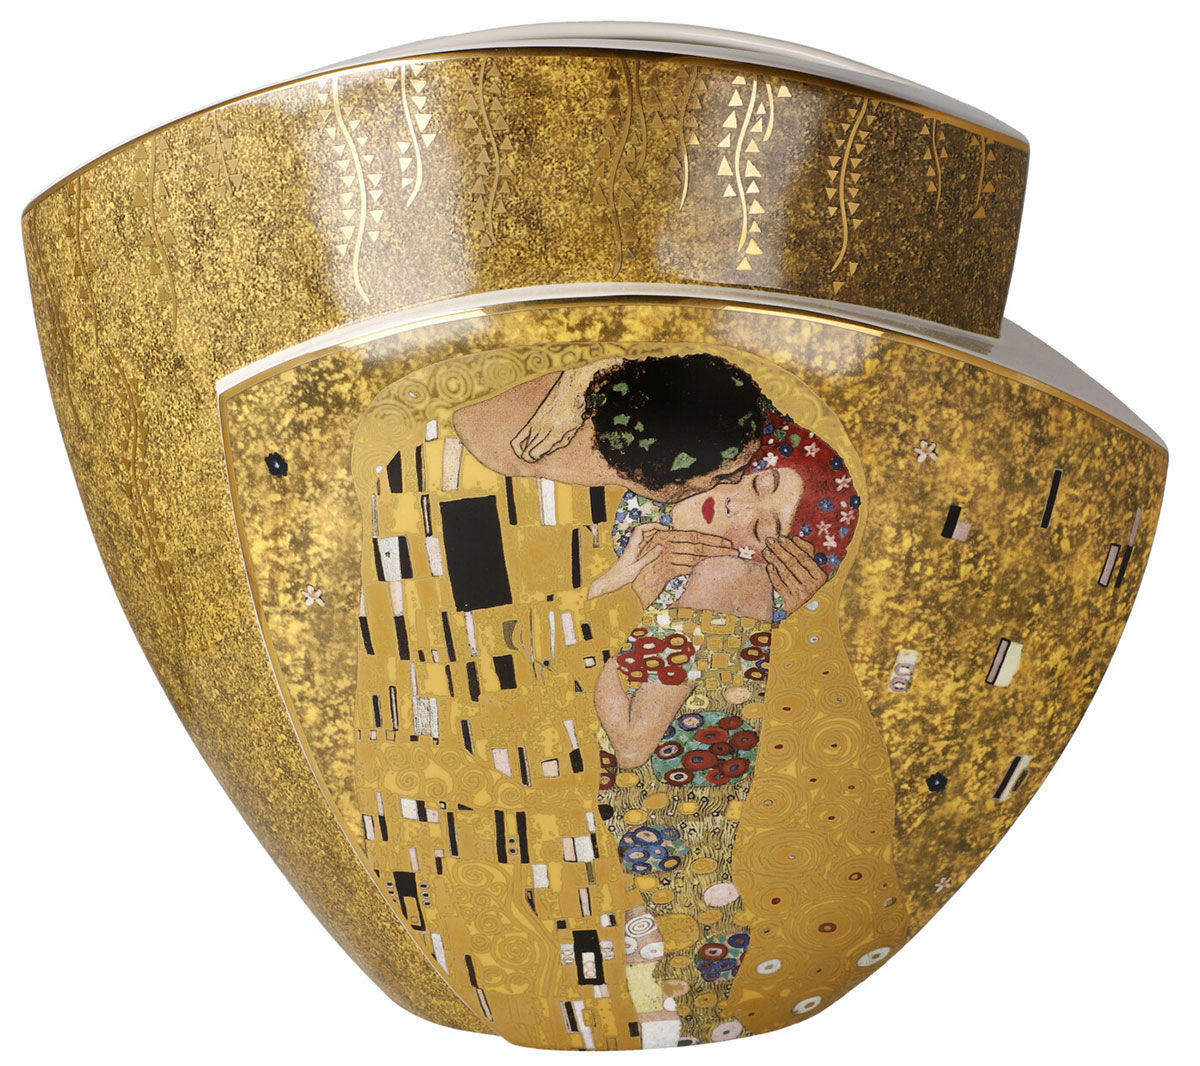 Double-sided porcelain vase "The Kiss / Adele Bloch-Bauer" with gold decoration by Gustav Klimt